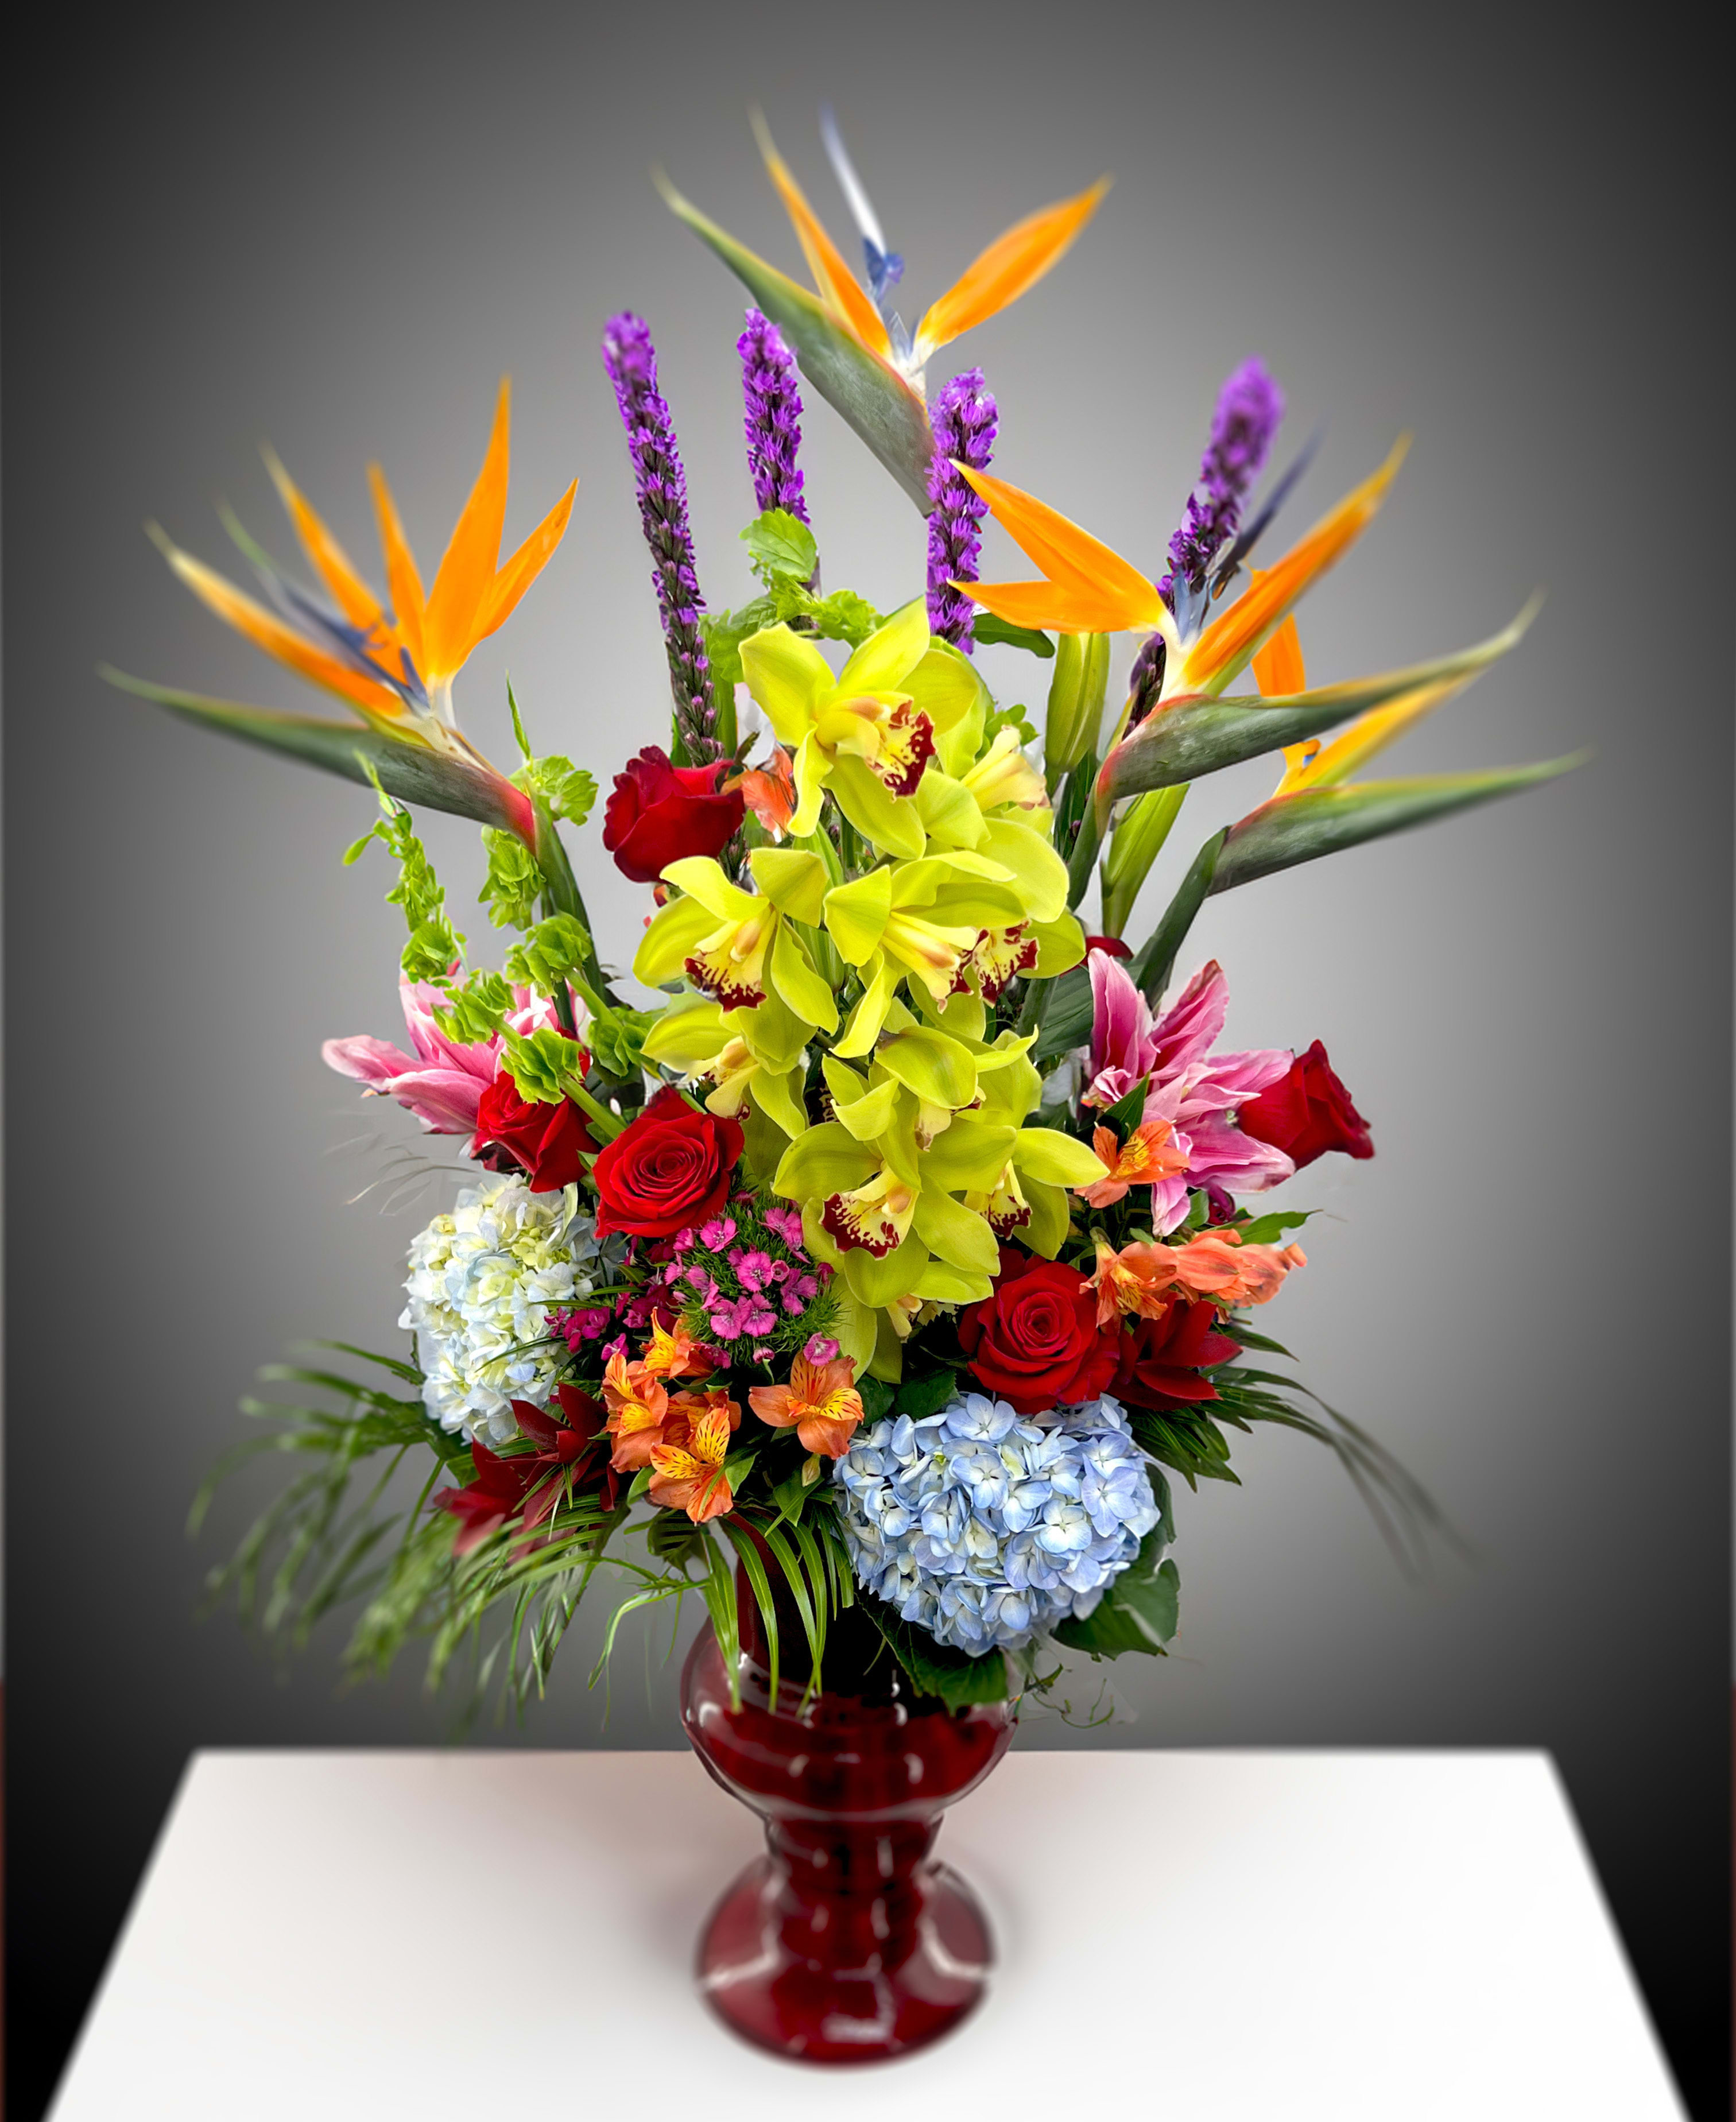 Flourish  - This is a gesture that is both bold and extravagant! A combination flowers including Birds Of Paradise, Cymbidium Orchids, Roses, Lilies, and other blooms